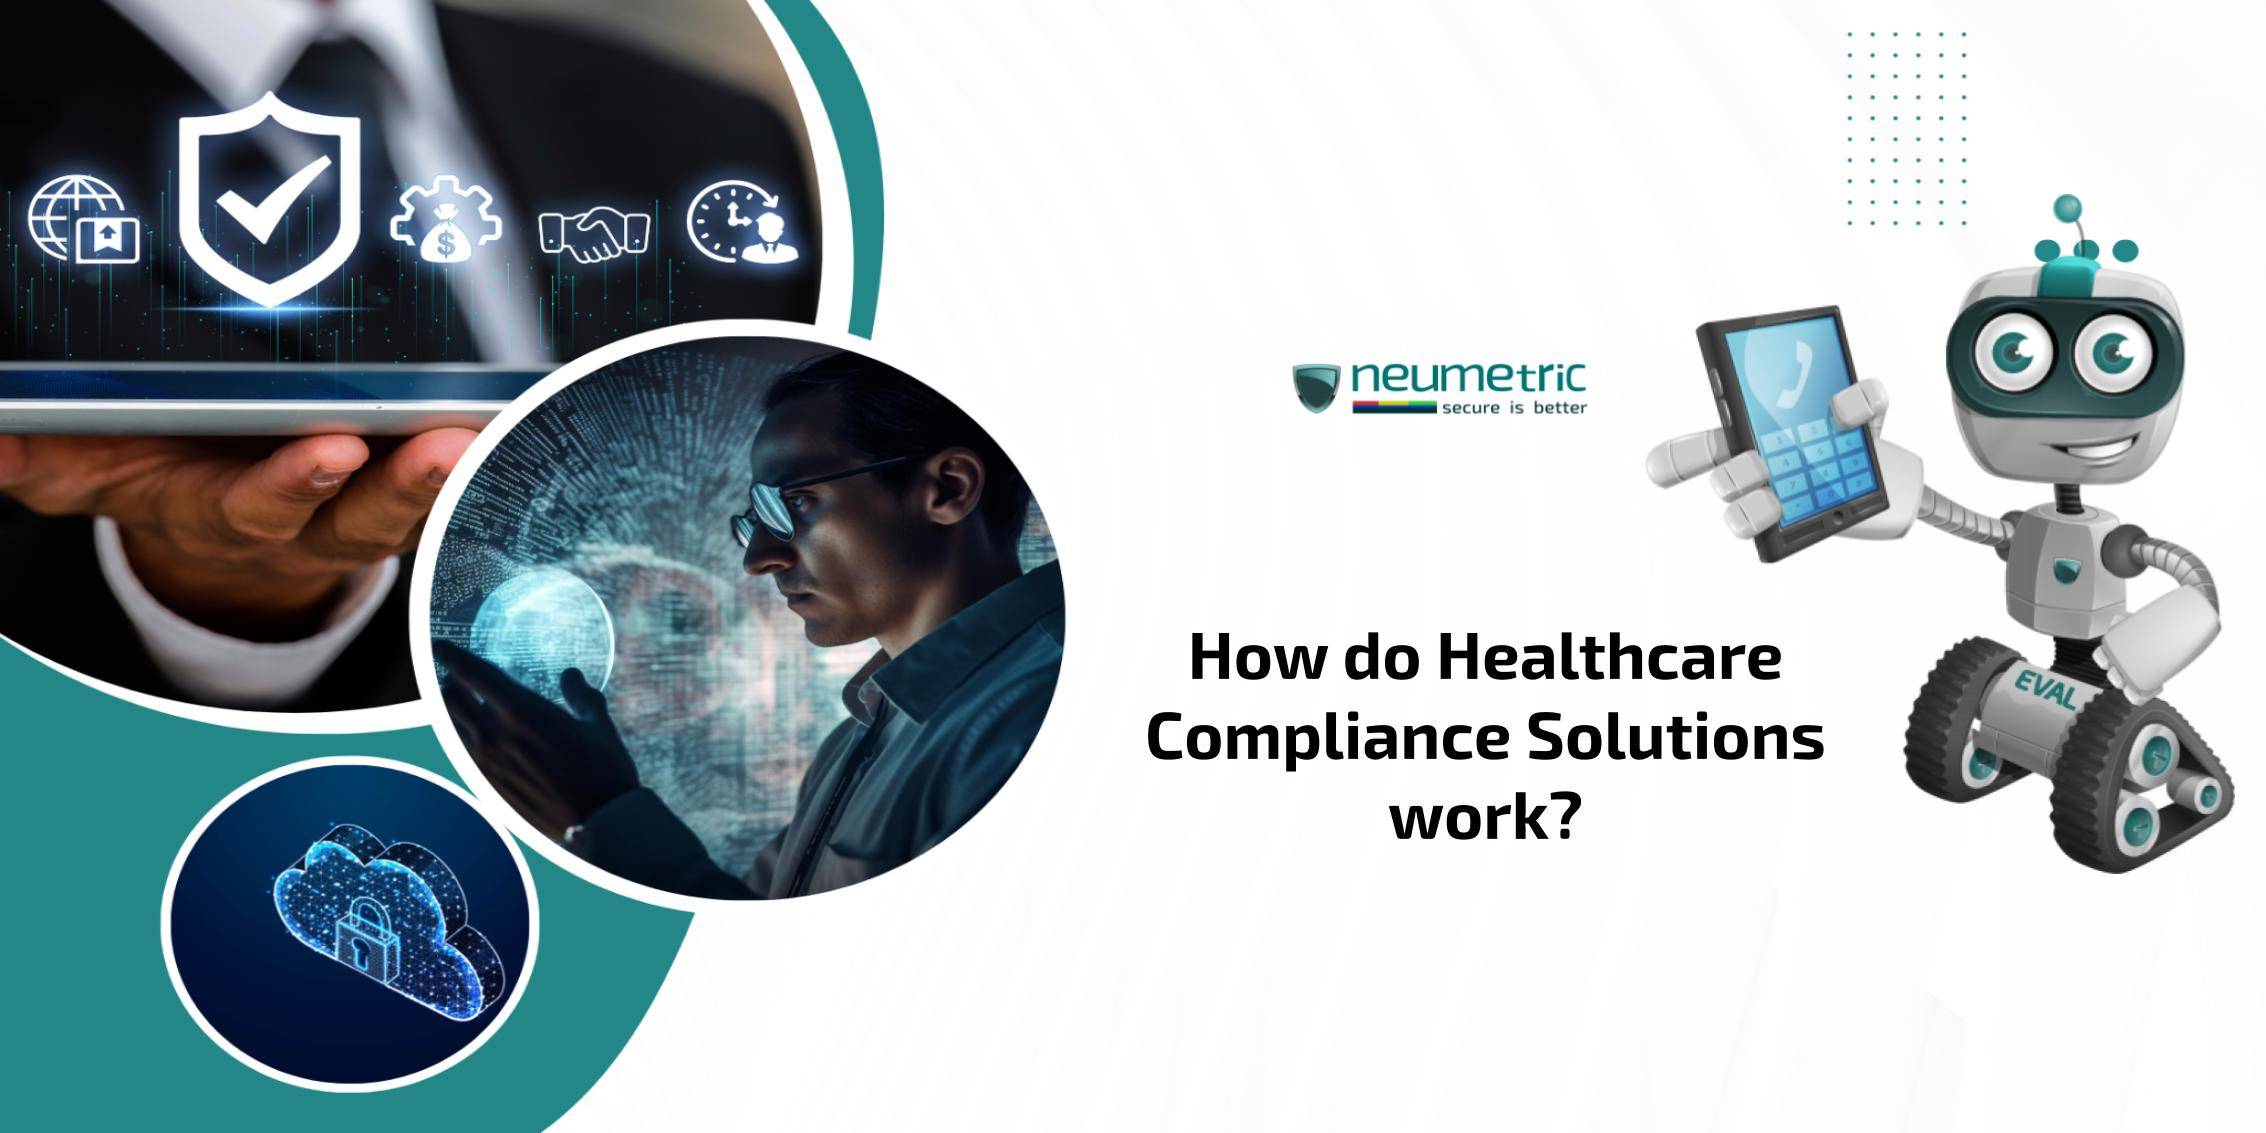 Healthcare compliance solutions